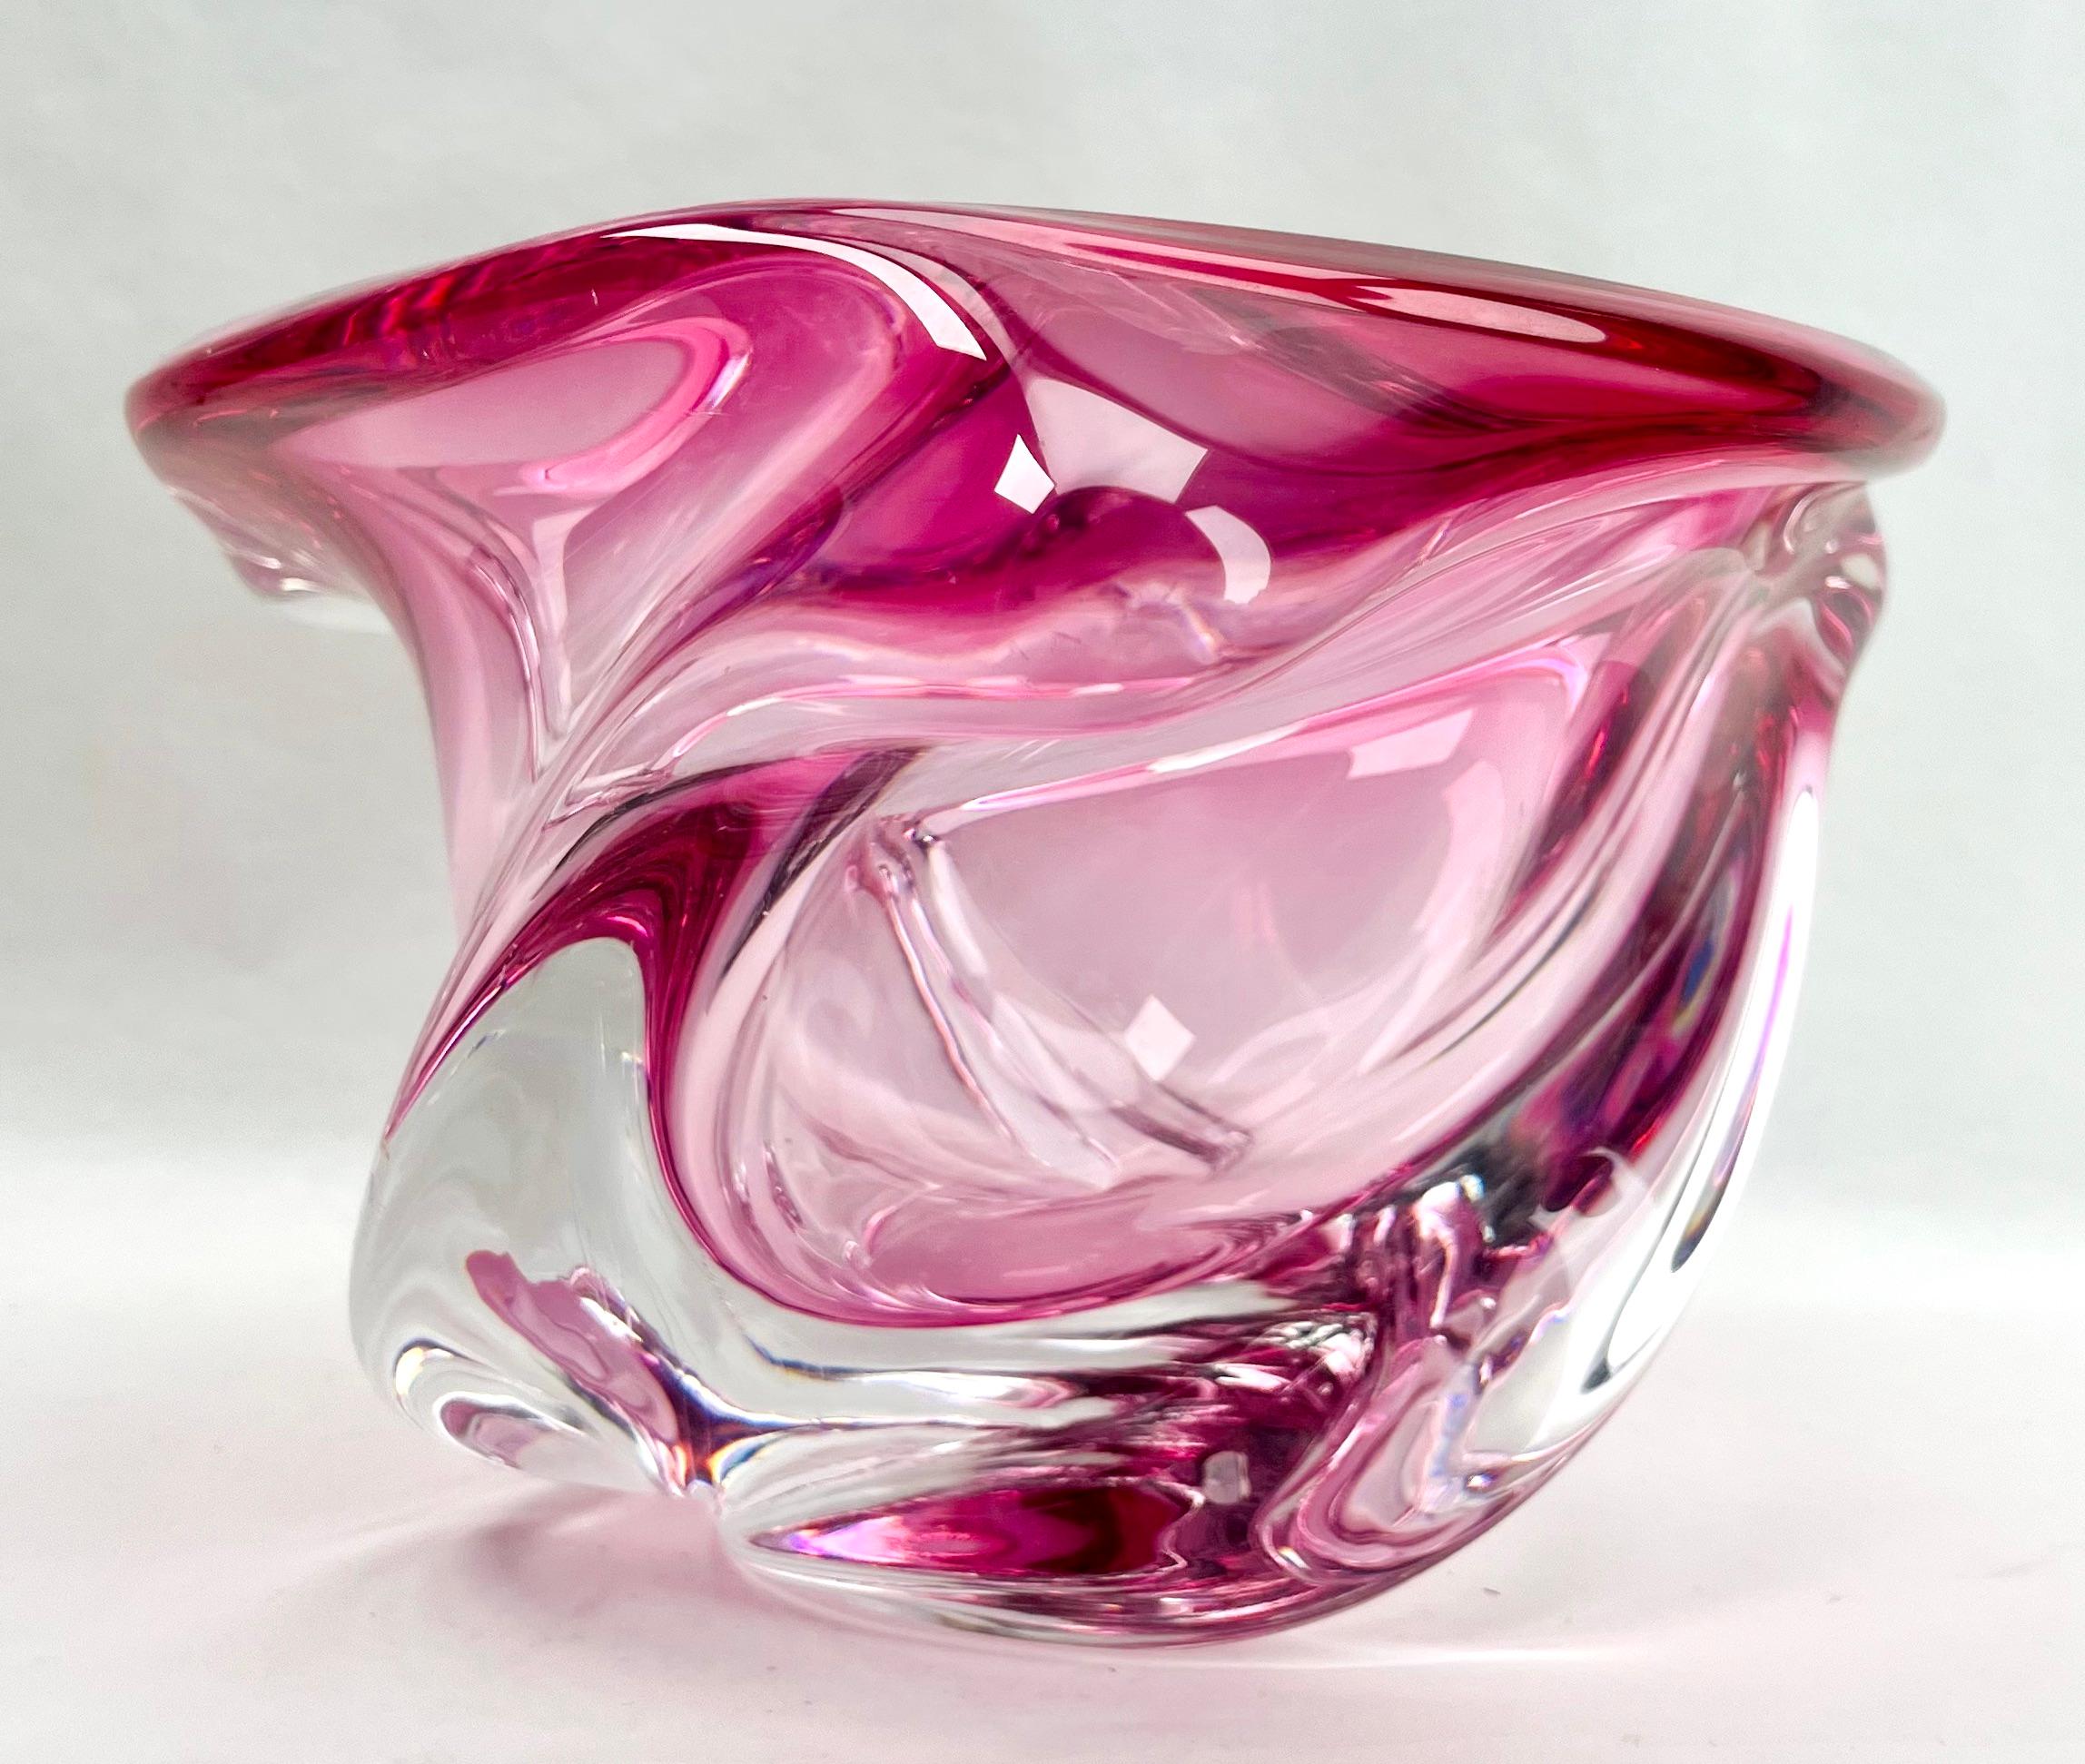 Belgian Val Saint Lambert Label Sculpted Crystal Vase with Sommerso Core, Belgium For Sale